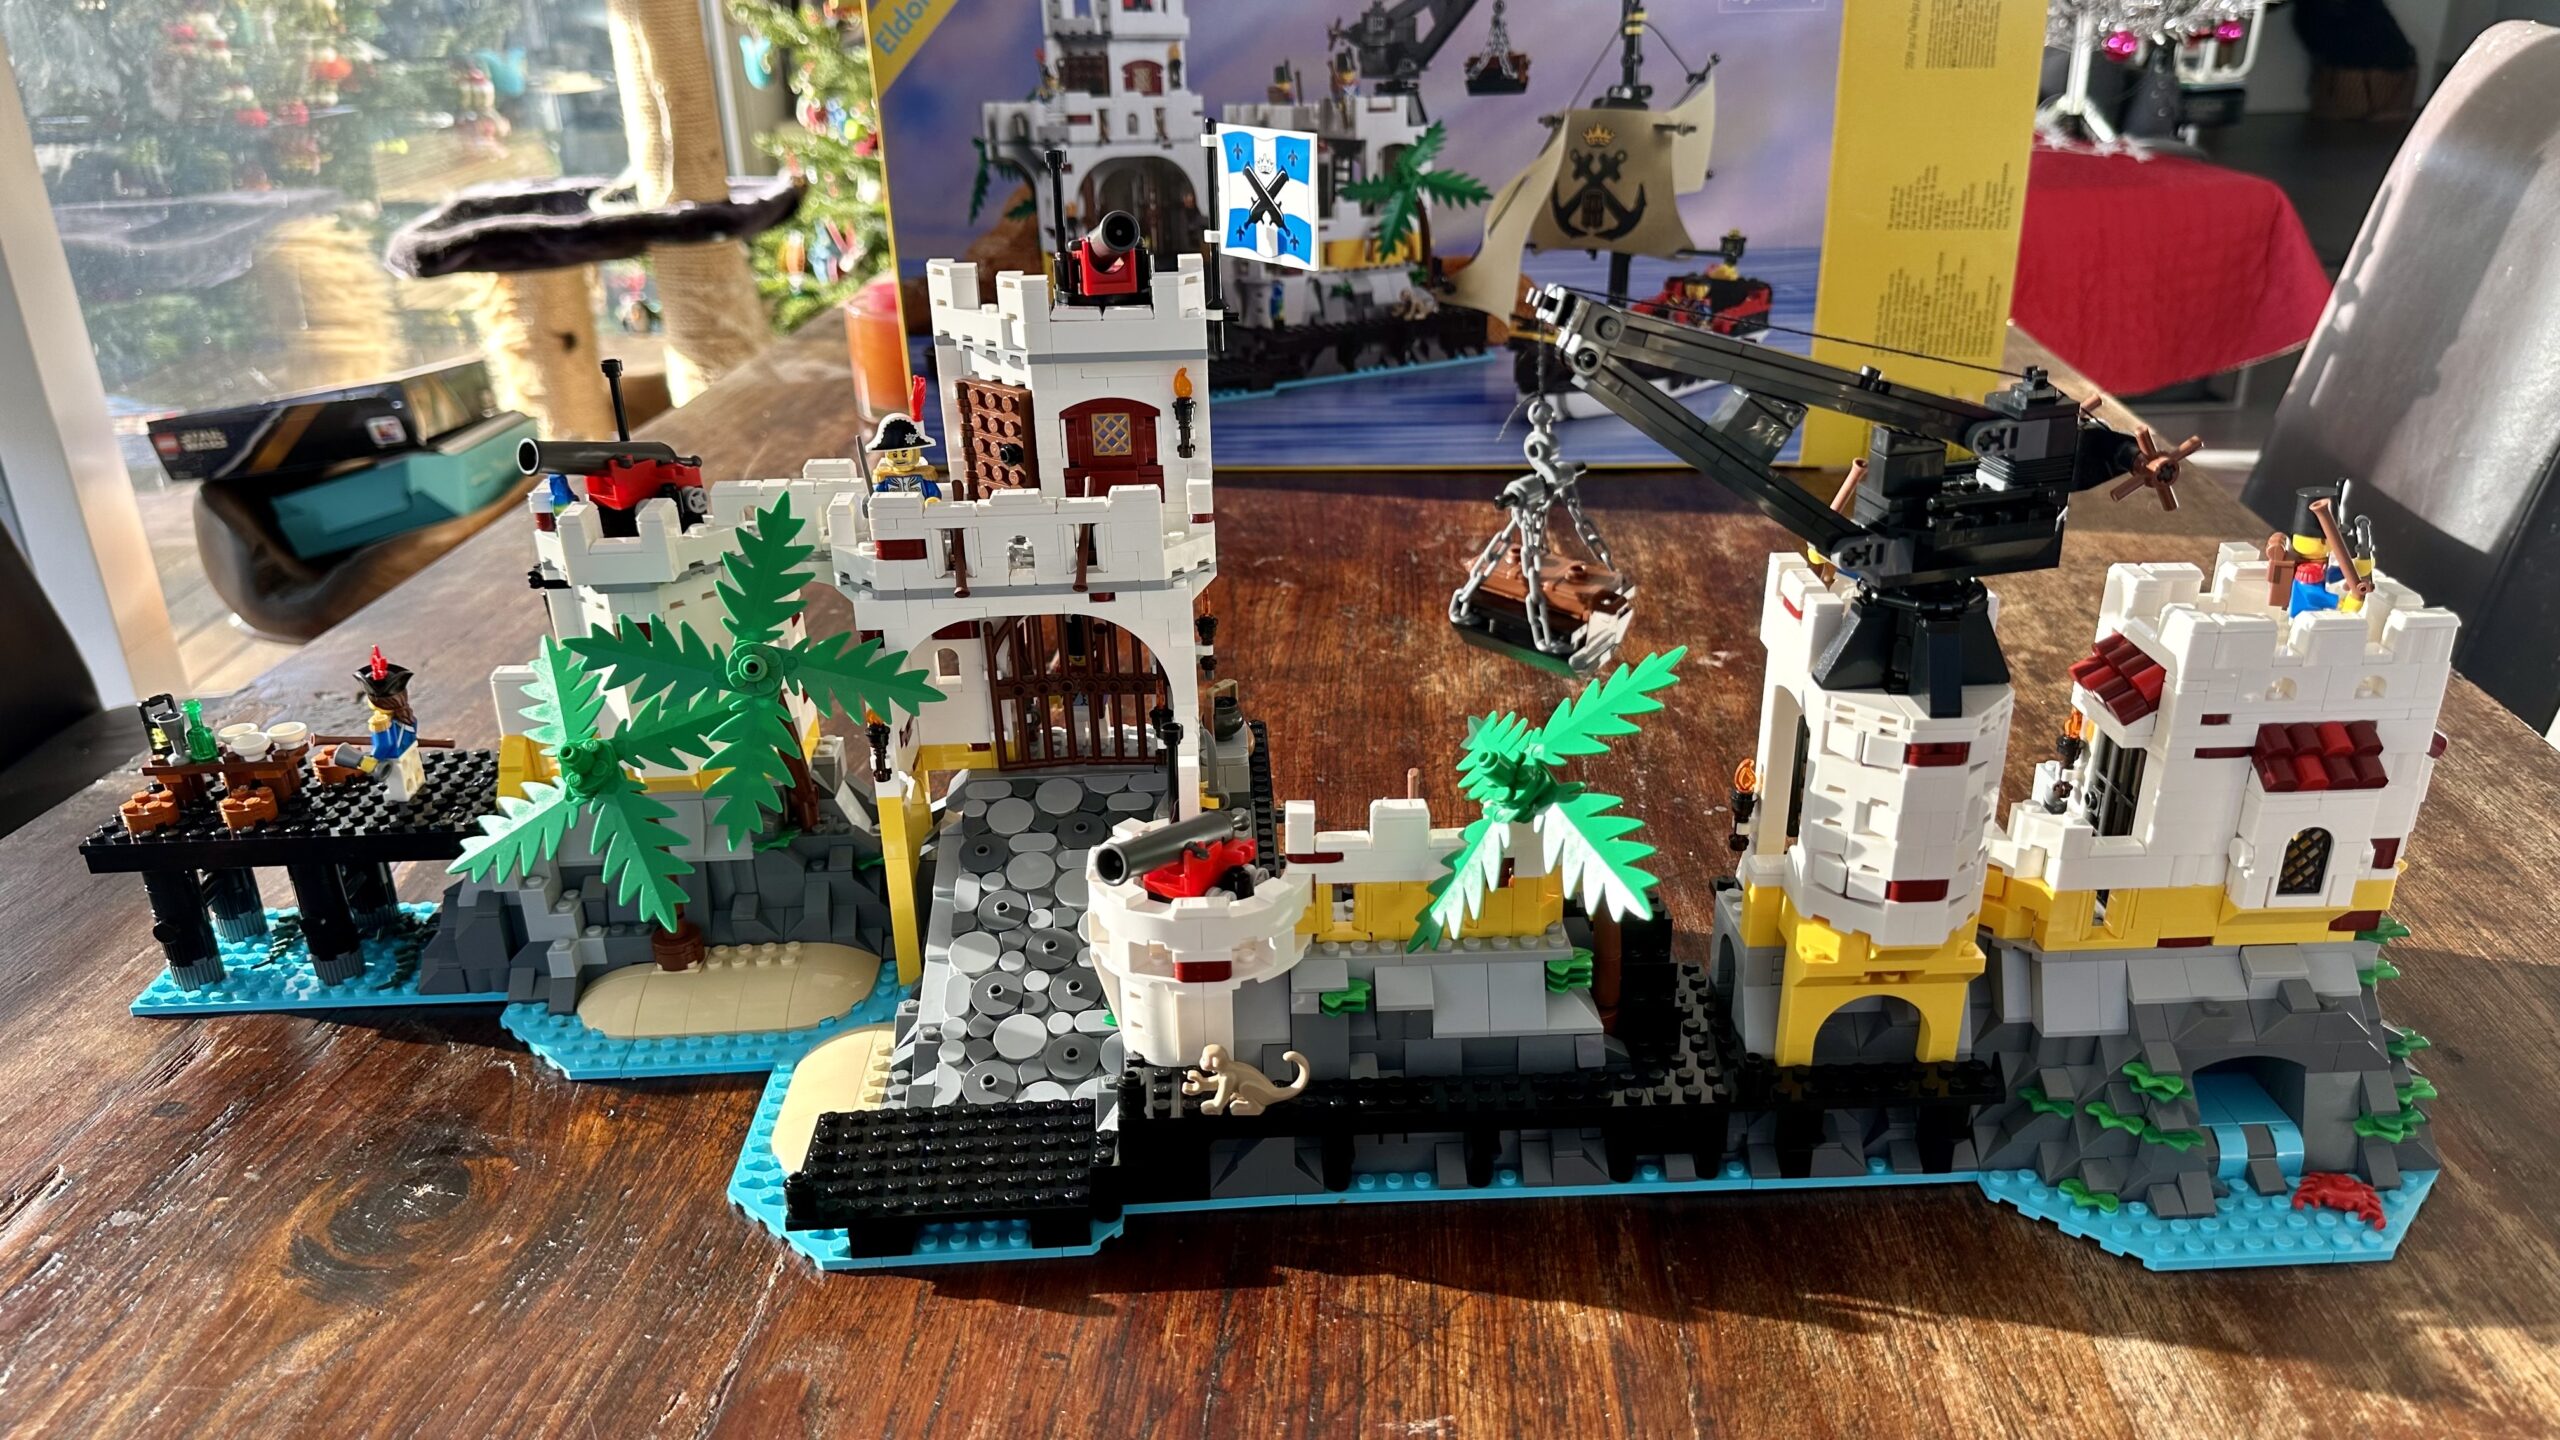 The completed LEGO set 10320 Eldorado Fortress with the sections arranged end-to-end to form a wide seaside wall.